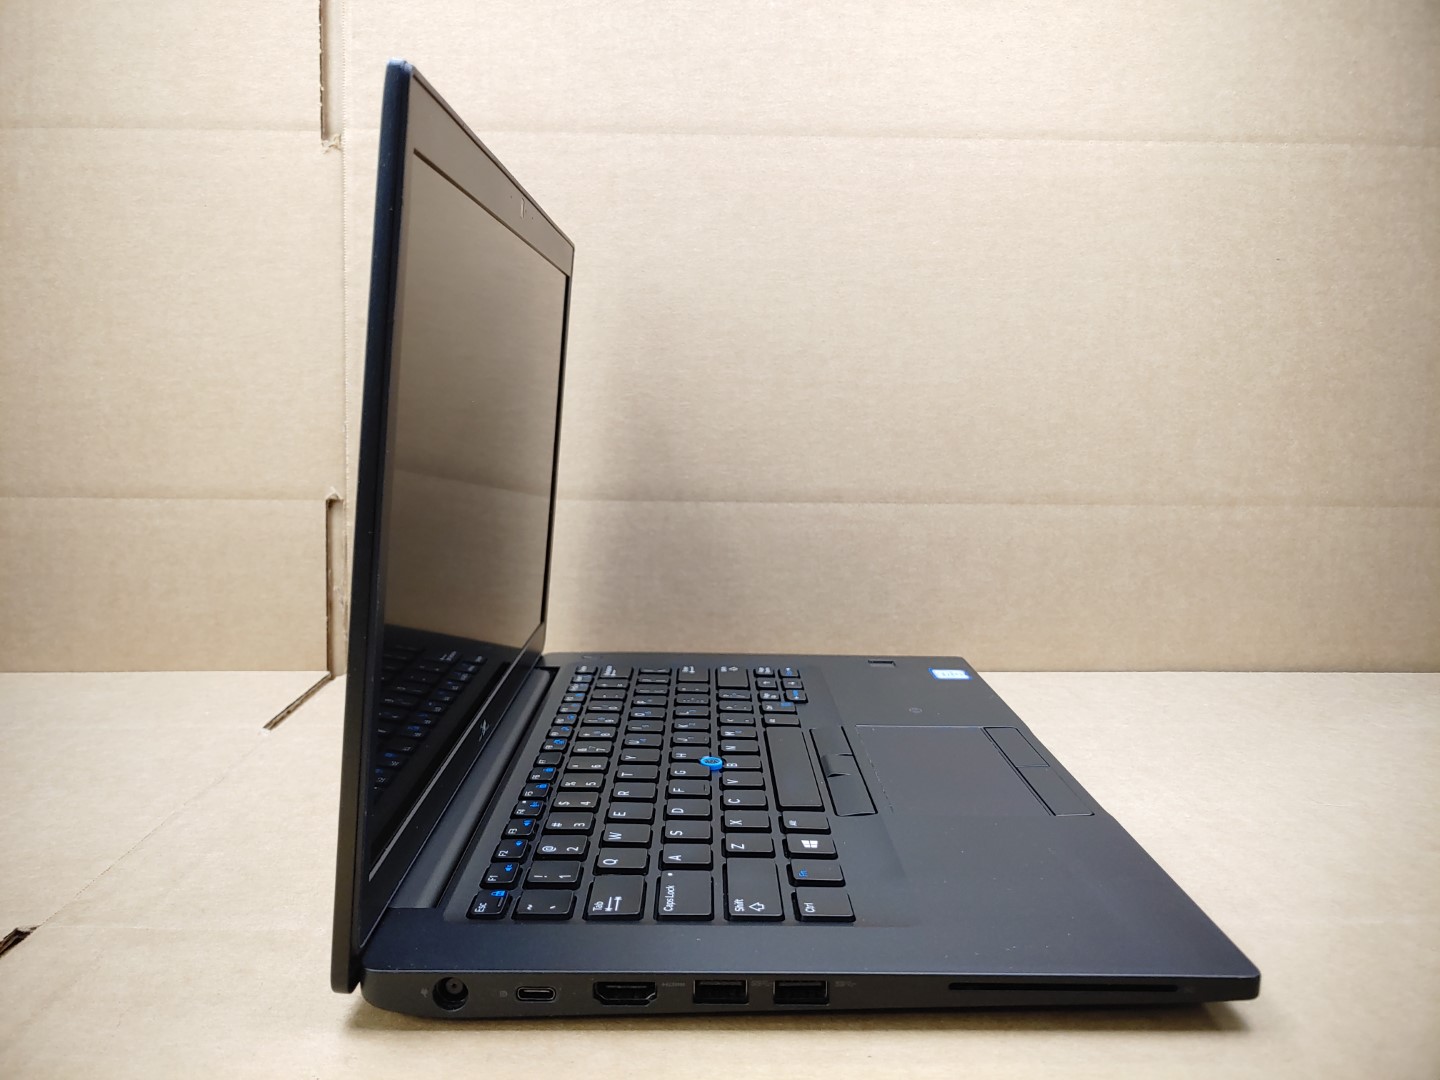 we have added actual images to this listing of the Dell Latitude you would receive. **NO POWER ADAPTER / NO SSD or HDD/ NO OS/ NO BATTERY or CABLE**Item Specifics: MPN : Latitude 7490UPC : N/AType : LaptopBrand : DellProduct Line : LatitudeModel : Latitude 7490Operating System : N/AScreen Size : 14-inch FHDProcessor Type : Intel Core i5-7300U 7th GenProcessor Speed : 2.60GHzGraphics Processing Type : Intel(R) Kabylake GraphicsMemory : 8GBHard Drive Capacity : N/A - 1